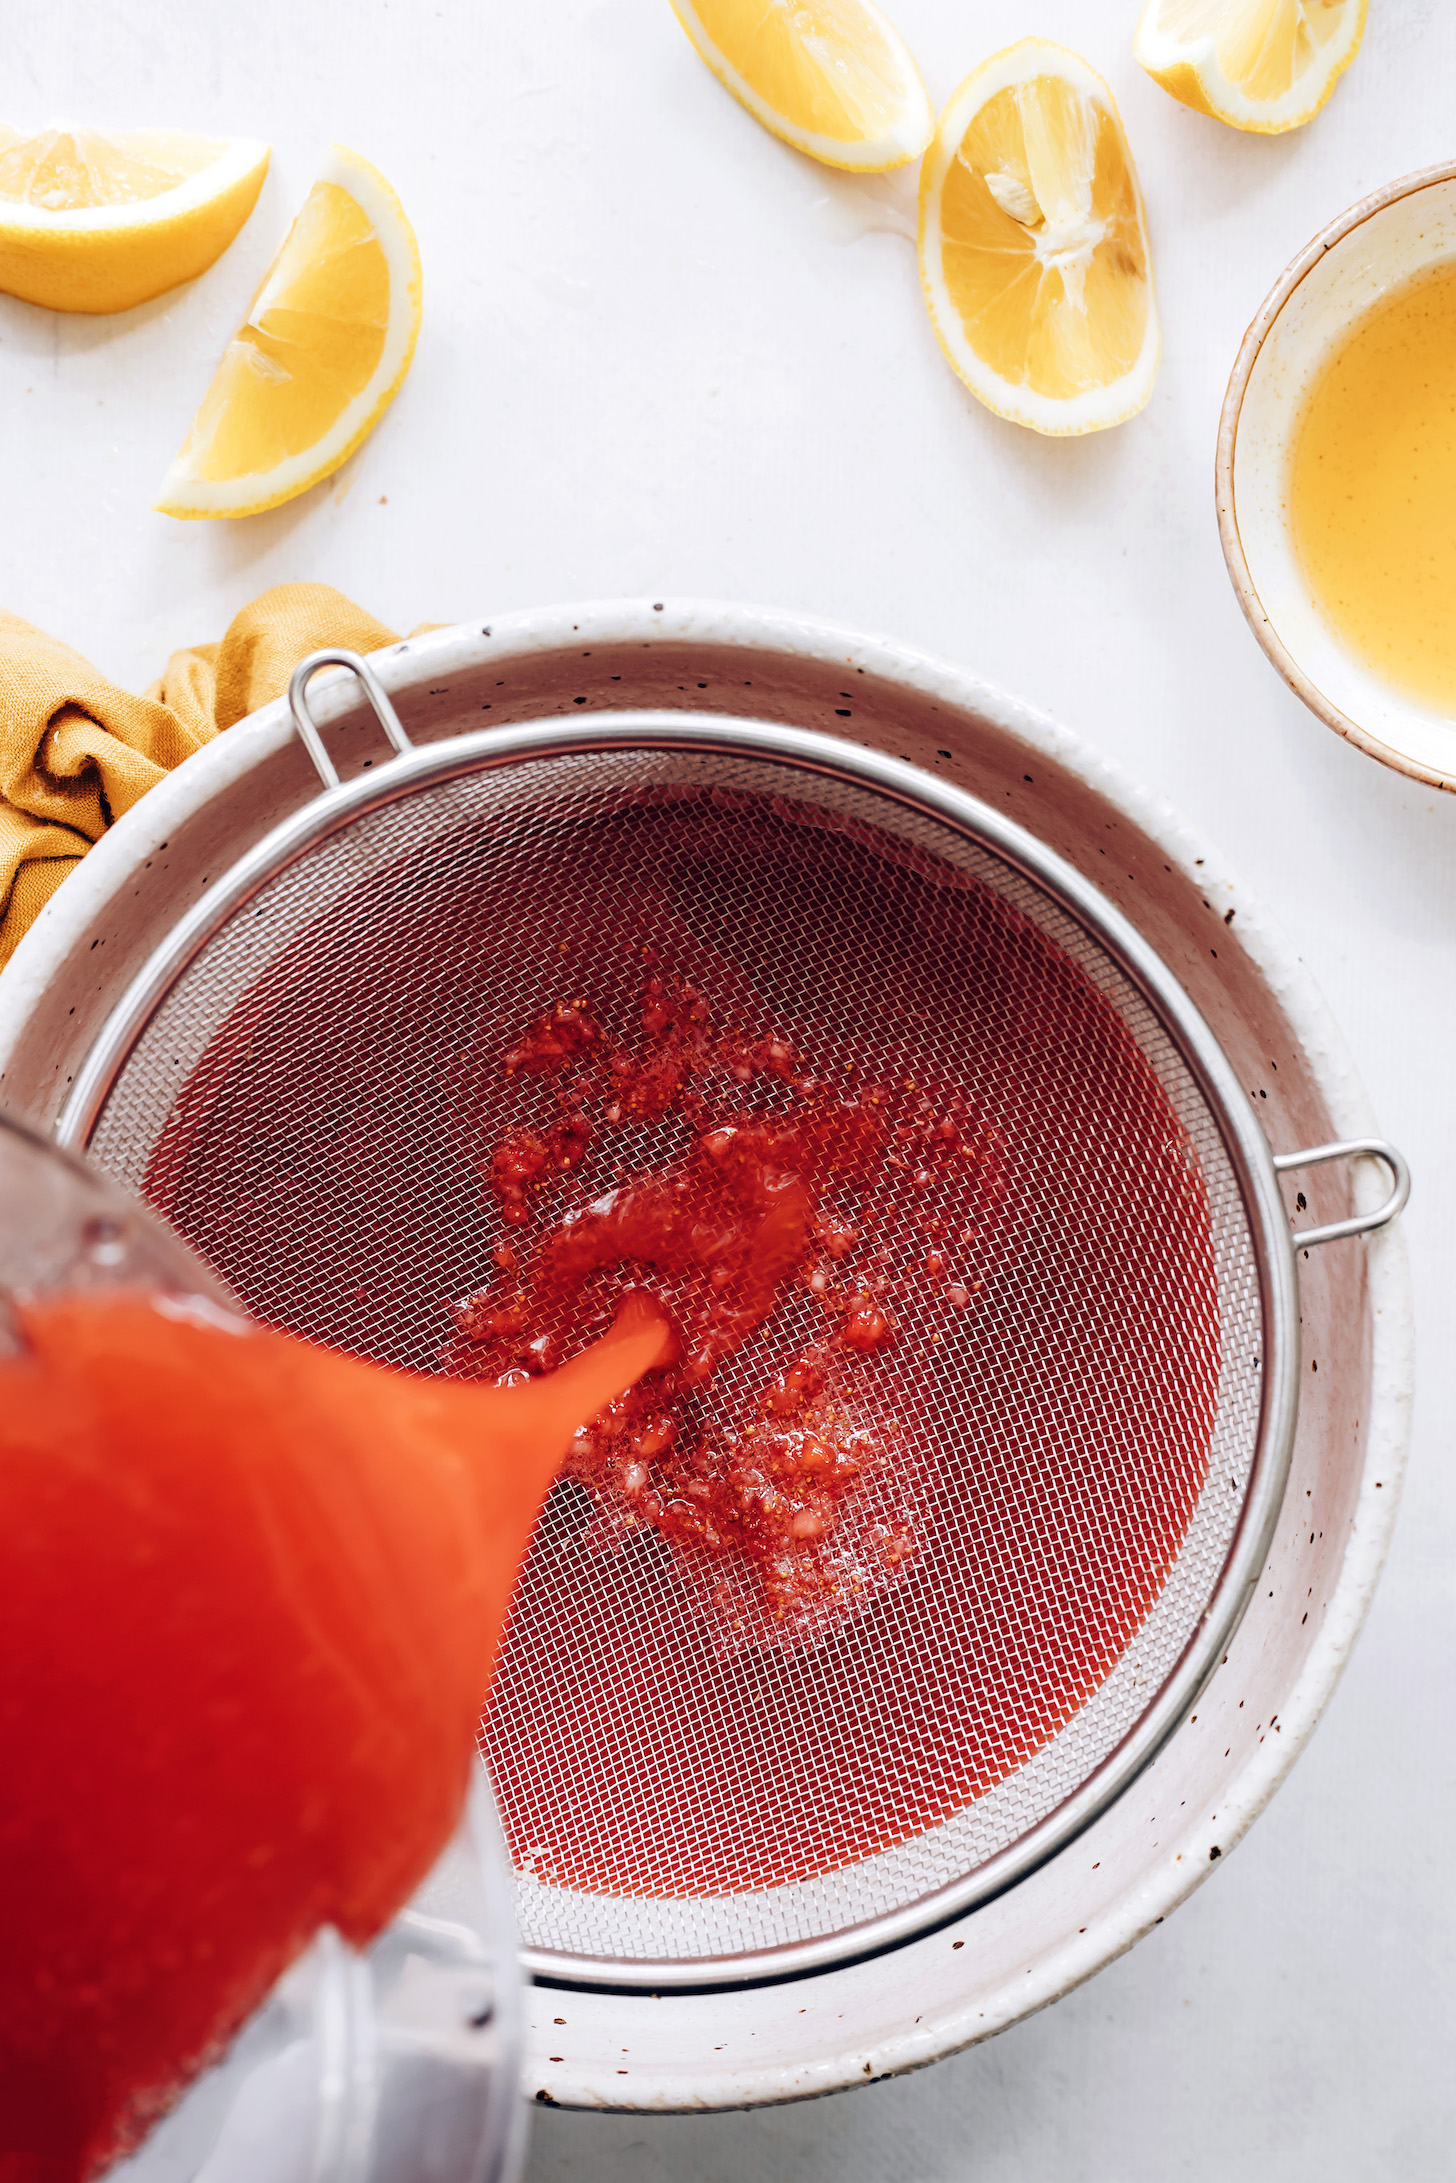 Pouring strawberry lemonade through a fine mesh strainer to remove strawberry seeds